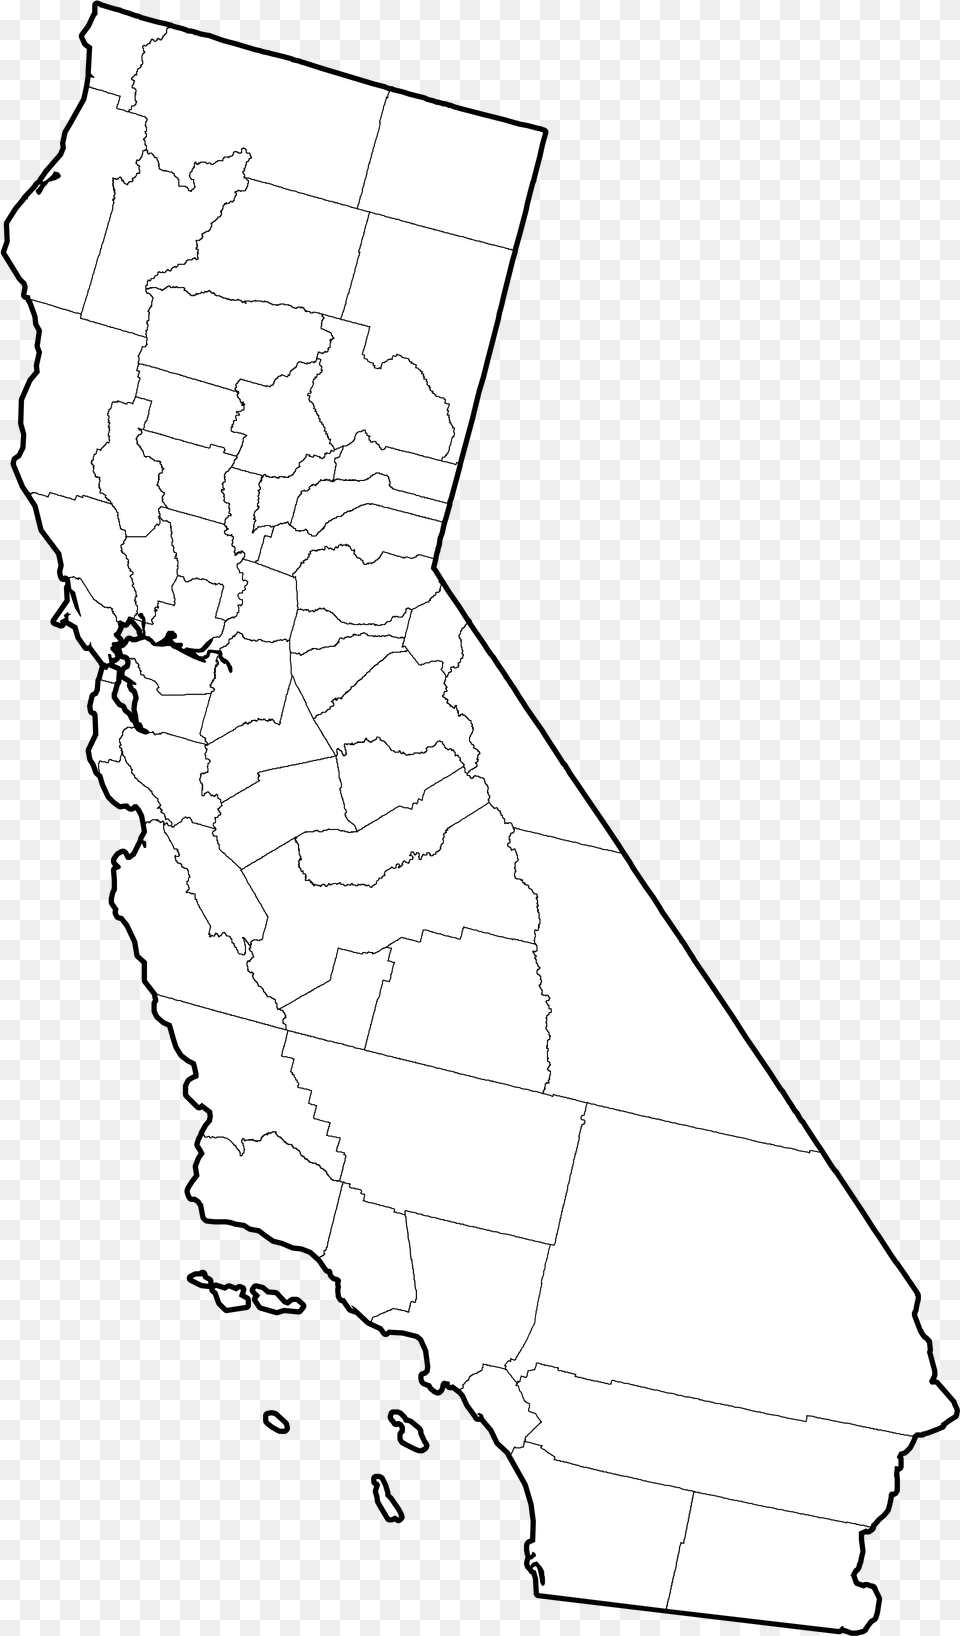 California Counties Outline Map California Outline Map, Chart, Plot, Atlas, Diagram Free Png Download